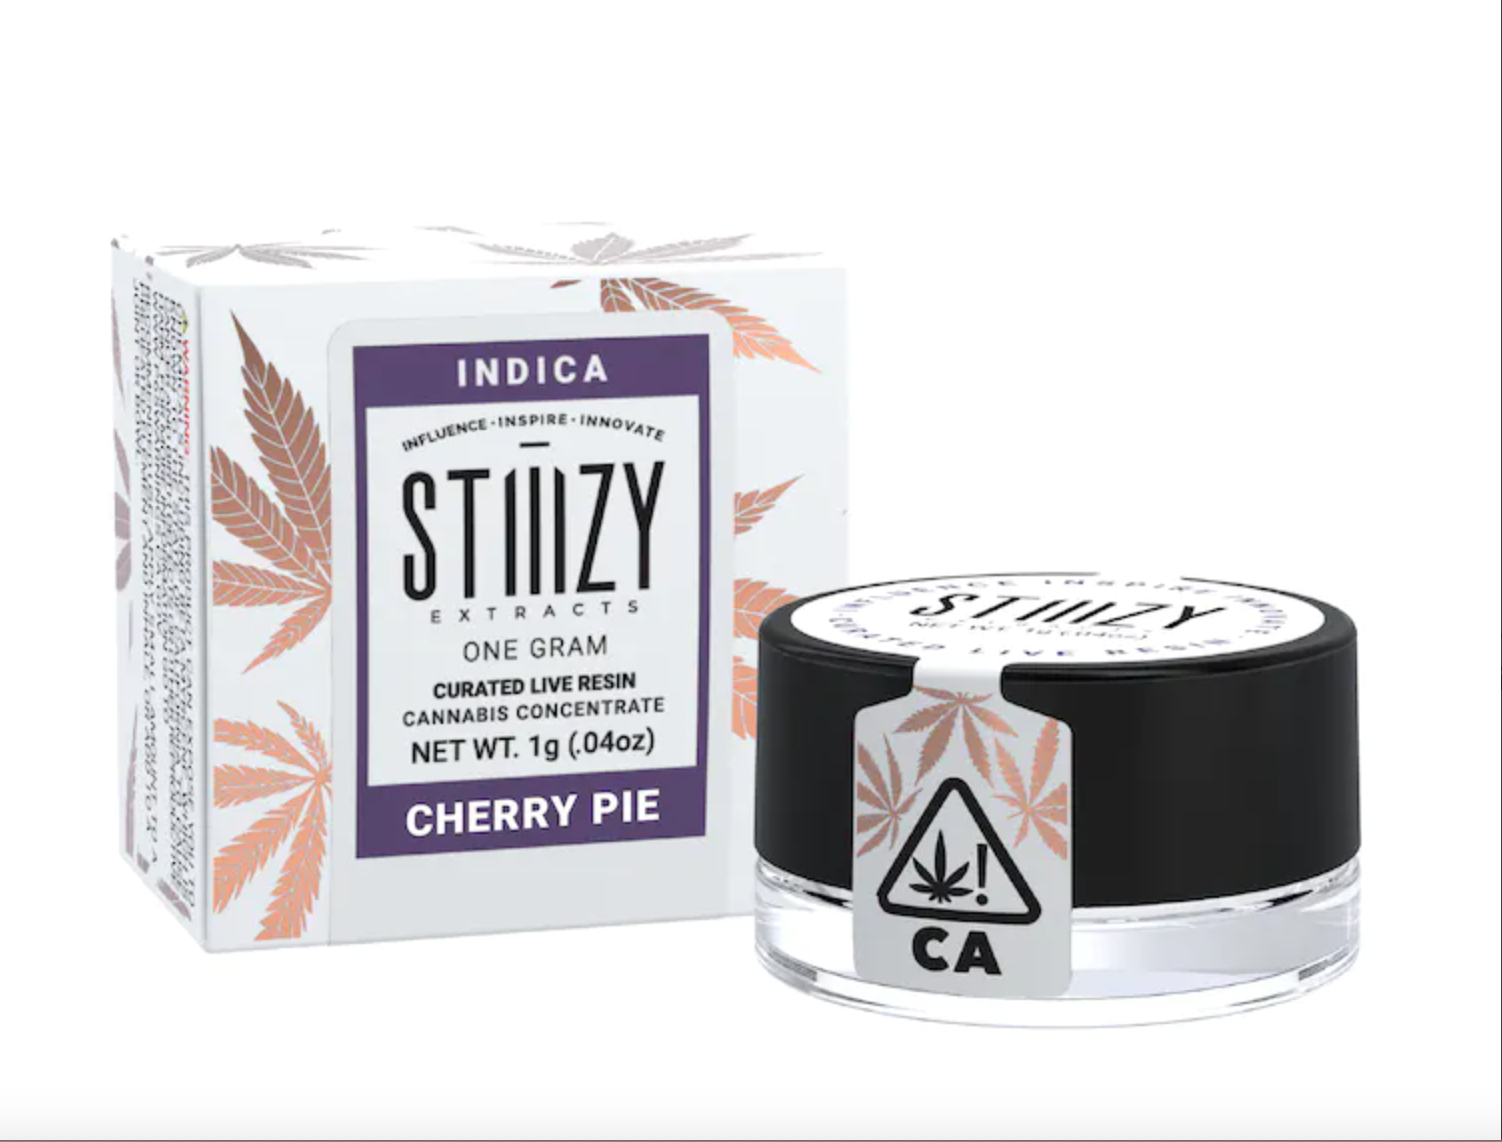 A white and pink box with curated live resin made from the Cherry Pie strain sits next to its glass jar.